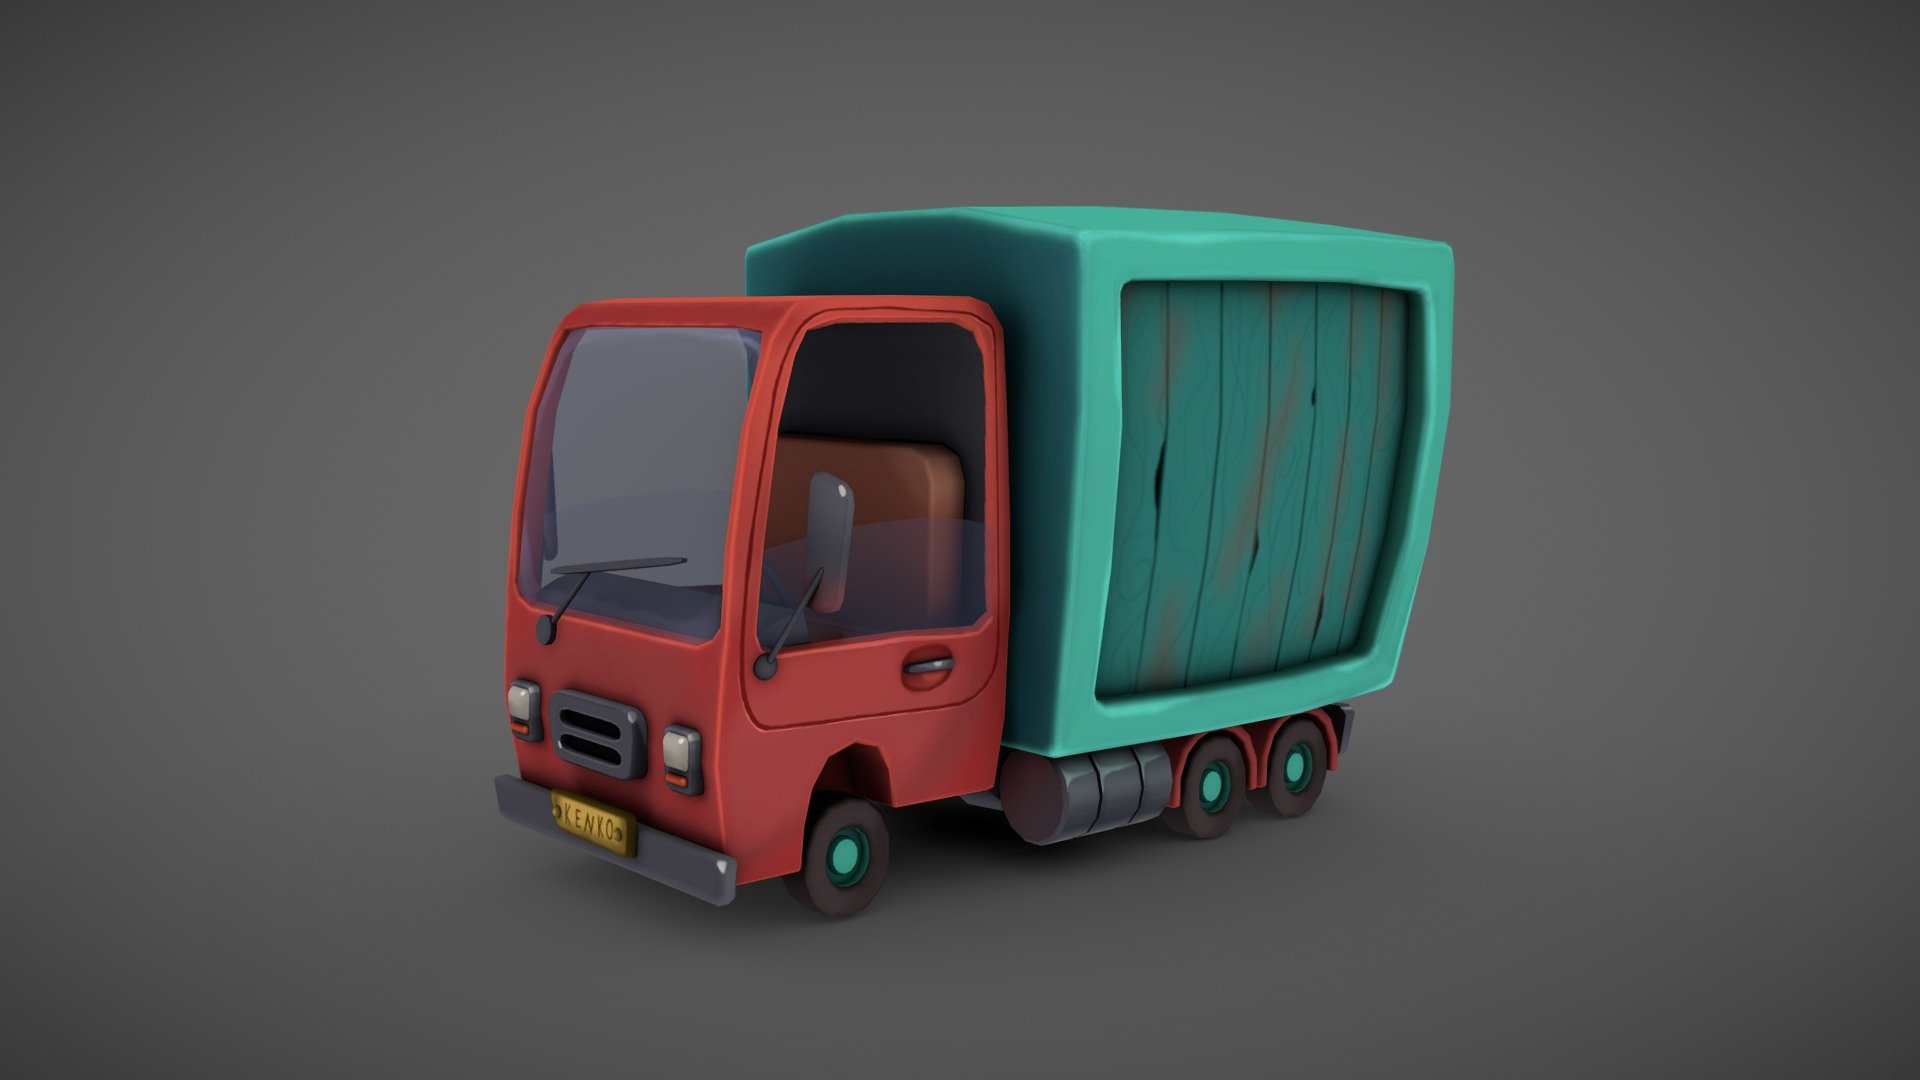 Handpainted Stylized Truck that I made for the 27th week of #SketchfabWeeklyChallenge. This weeks theme: “Car”.

“Delivering goods on a weekly basis”.

Based on an artwork made by Yogender Pal.

Made with Maya and Substance Painter 3d model